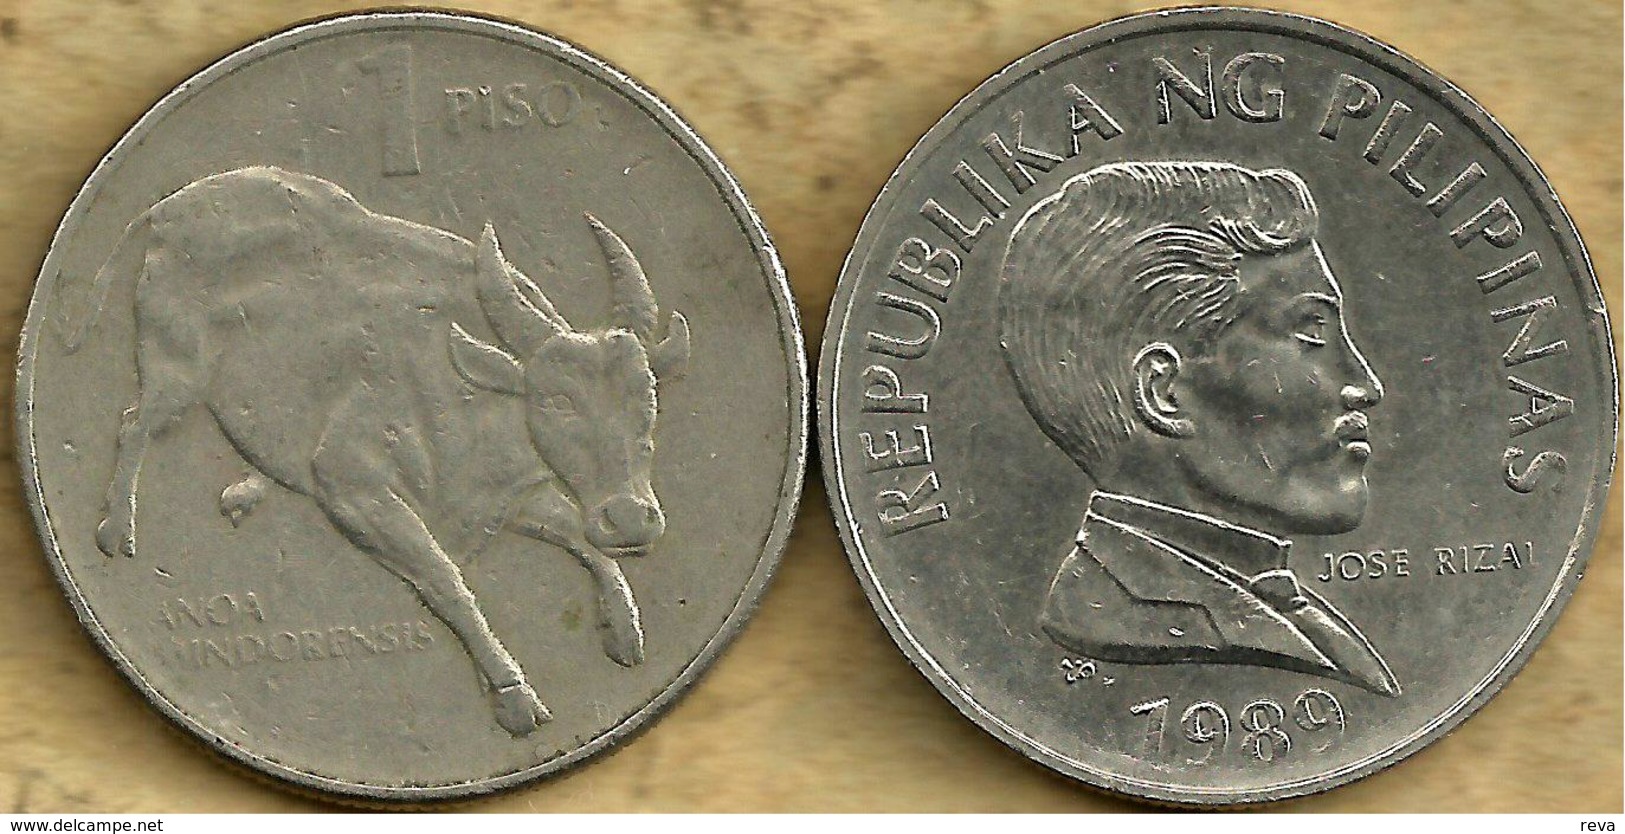 PHILIPPINES 1 PISO CARIBOU ANIMAL FRONT MAN HEAD BACK 1989 VF+ KM? READ DESCRIPTION CAREFULLY!! - Philippines